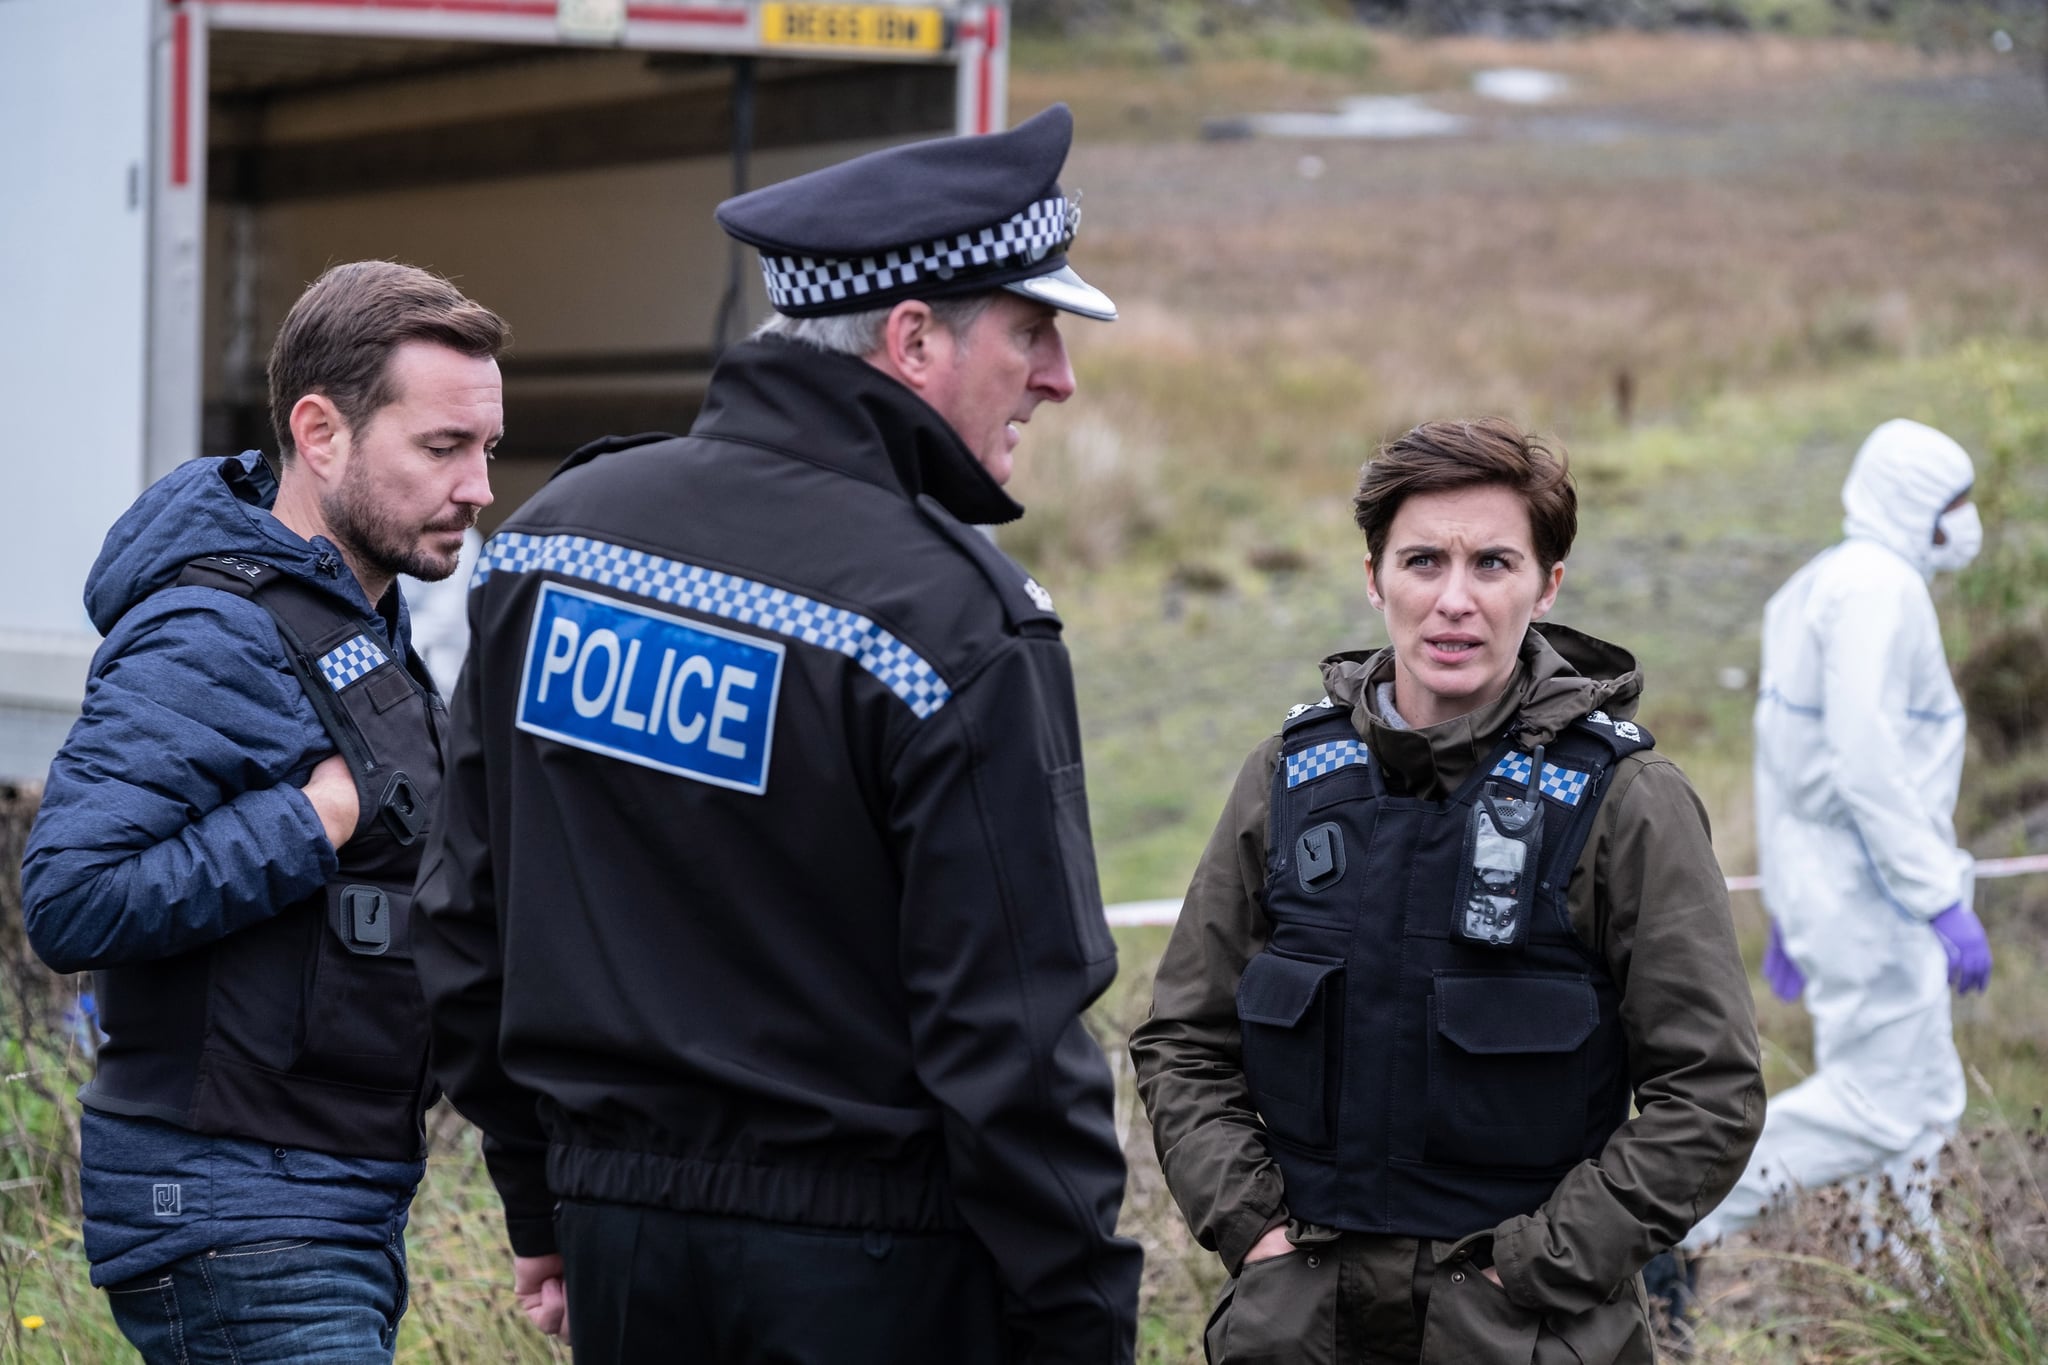 LINE OF DUTY, from left: Martin Compston, Adrian Dunbar, Vicky McClure, (Season 5, aired May 13, 2019). BBC/Acorn TV / courtesy Everett Collection